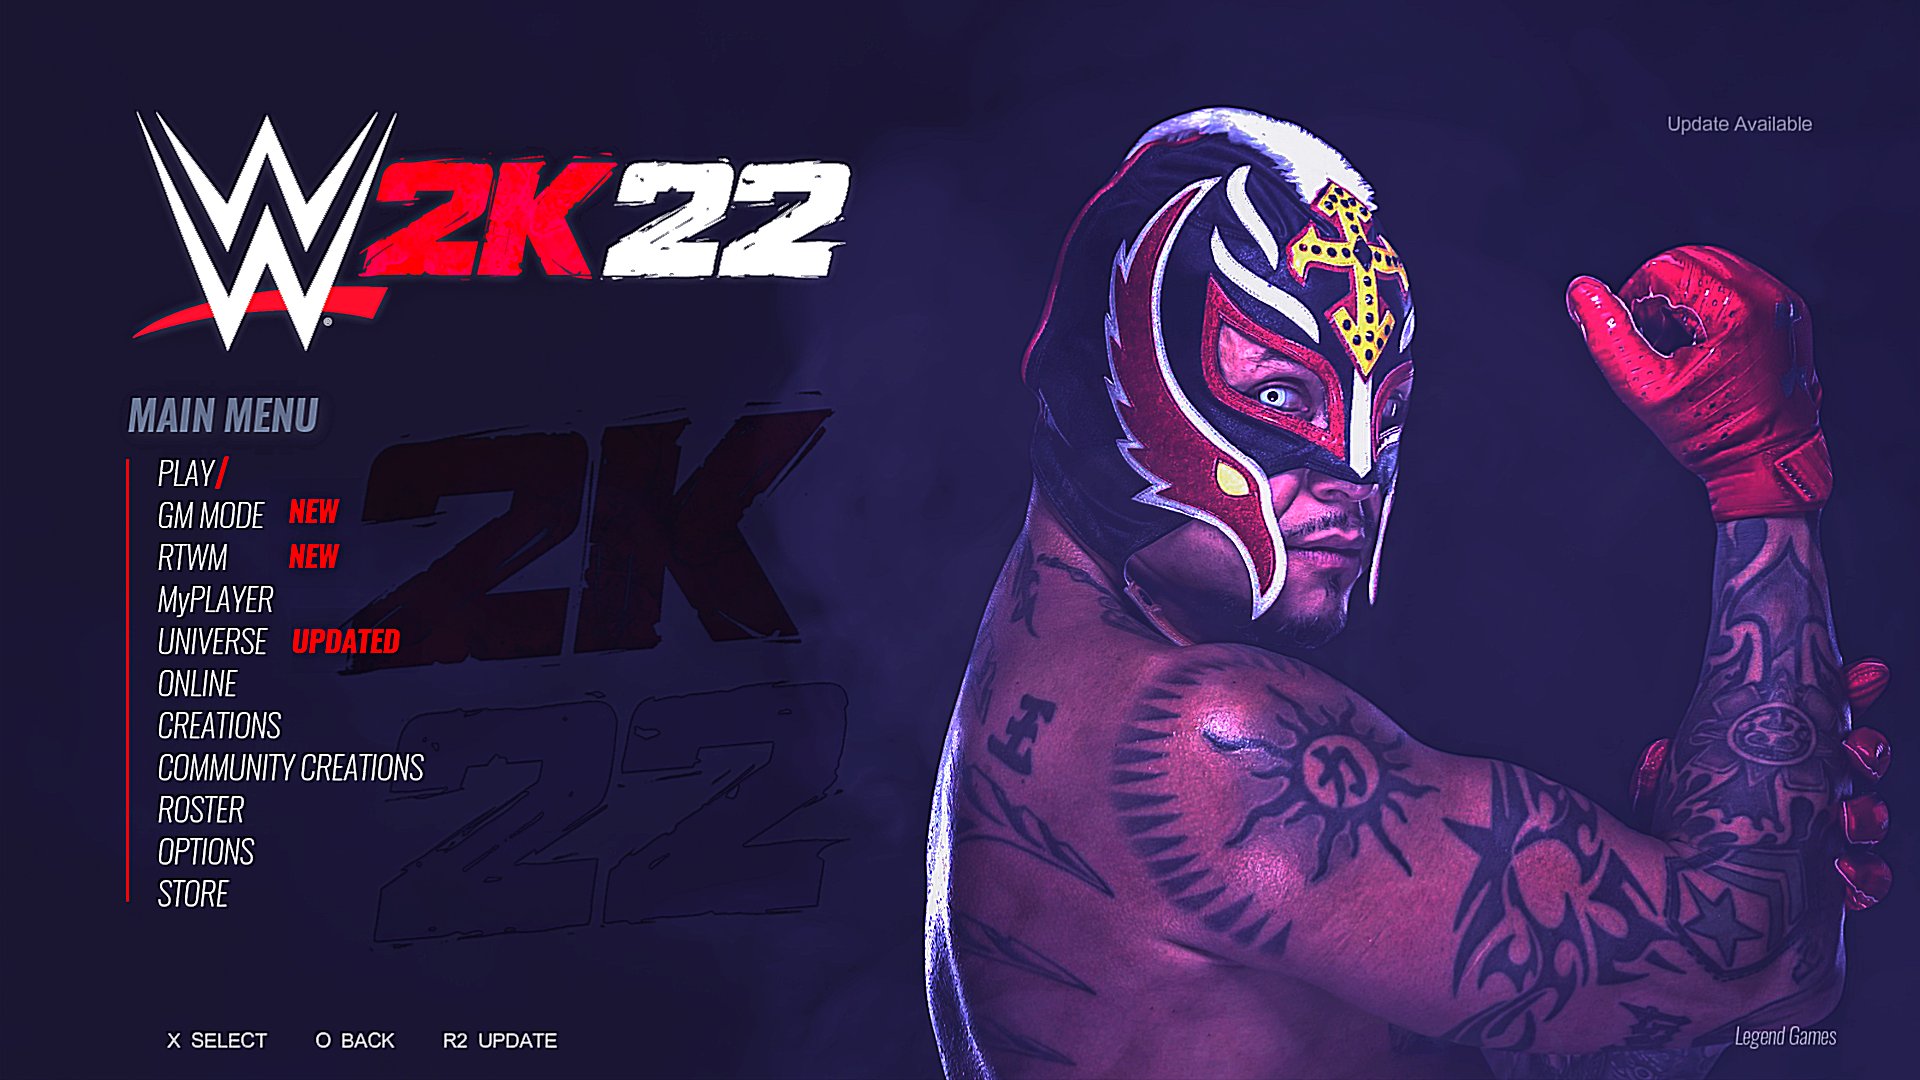 Leon on Twitter: I made this Main Menu concept for WWE 2K22